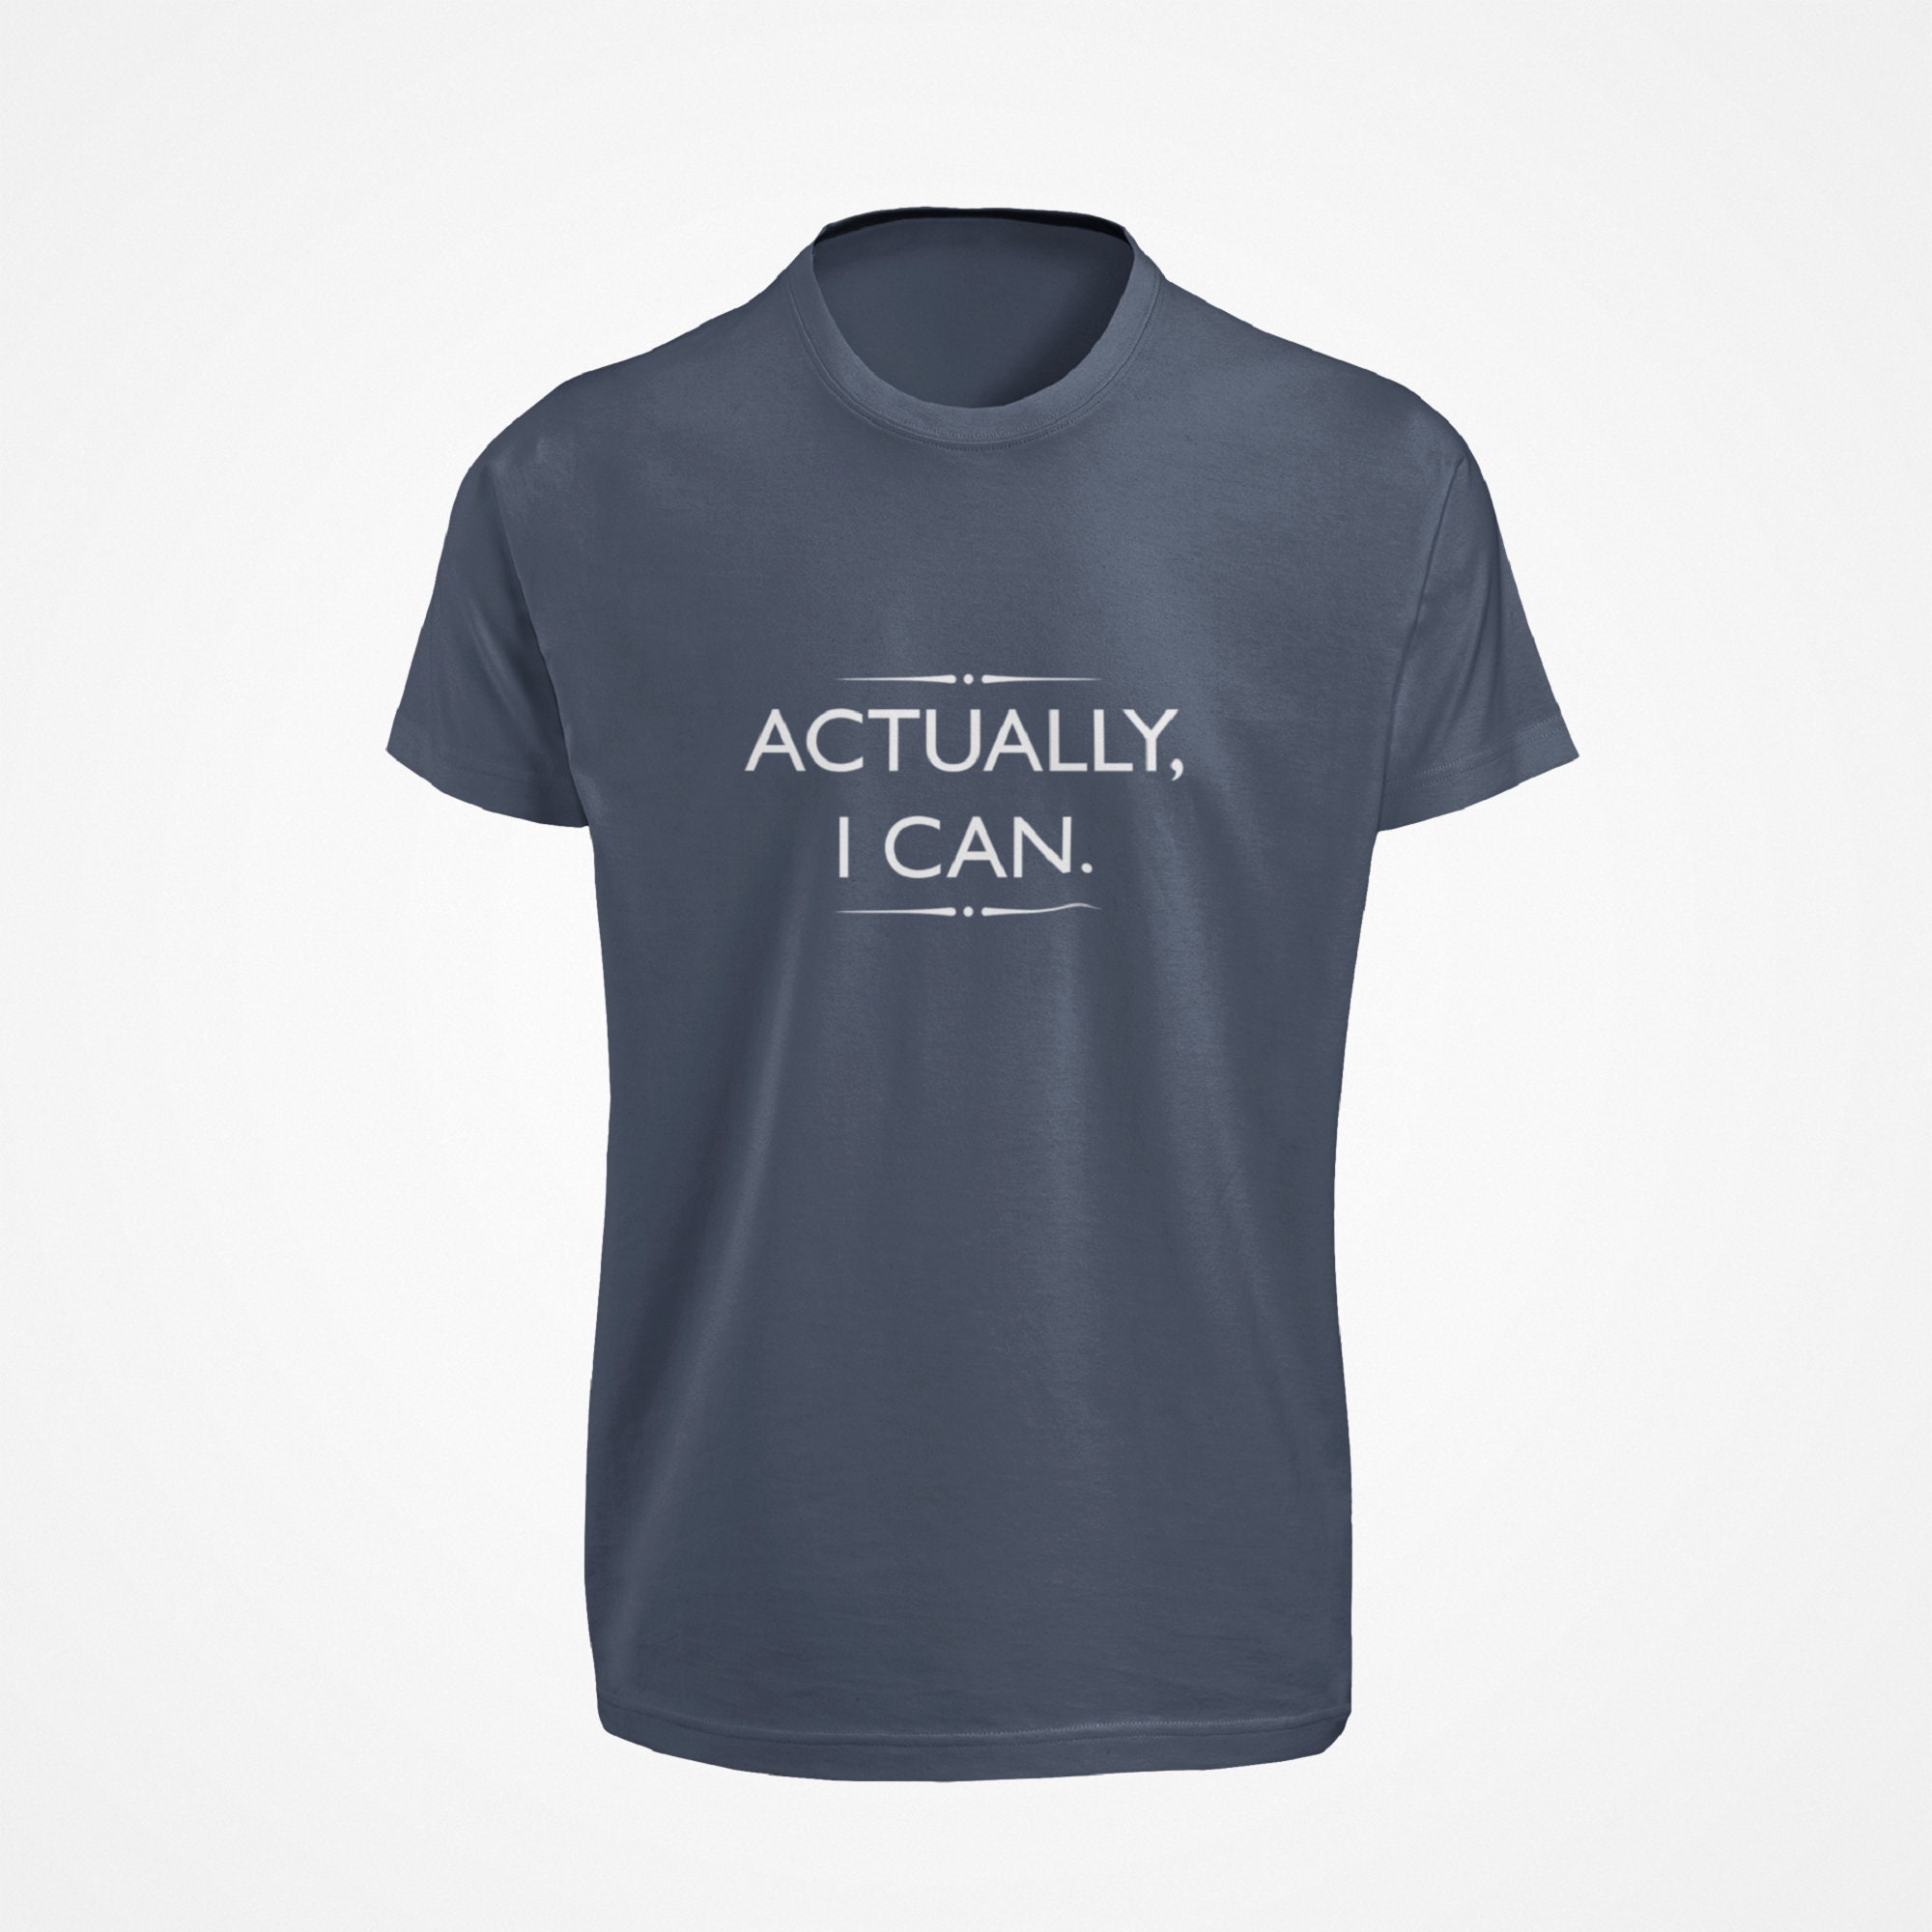 Actually I Can Tshirt Unisex Cotton Tee Graphic Printed | Etsy